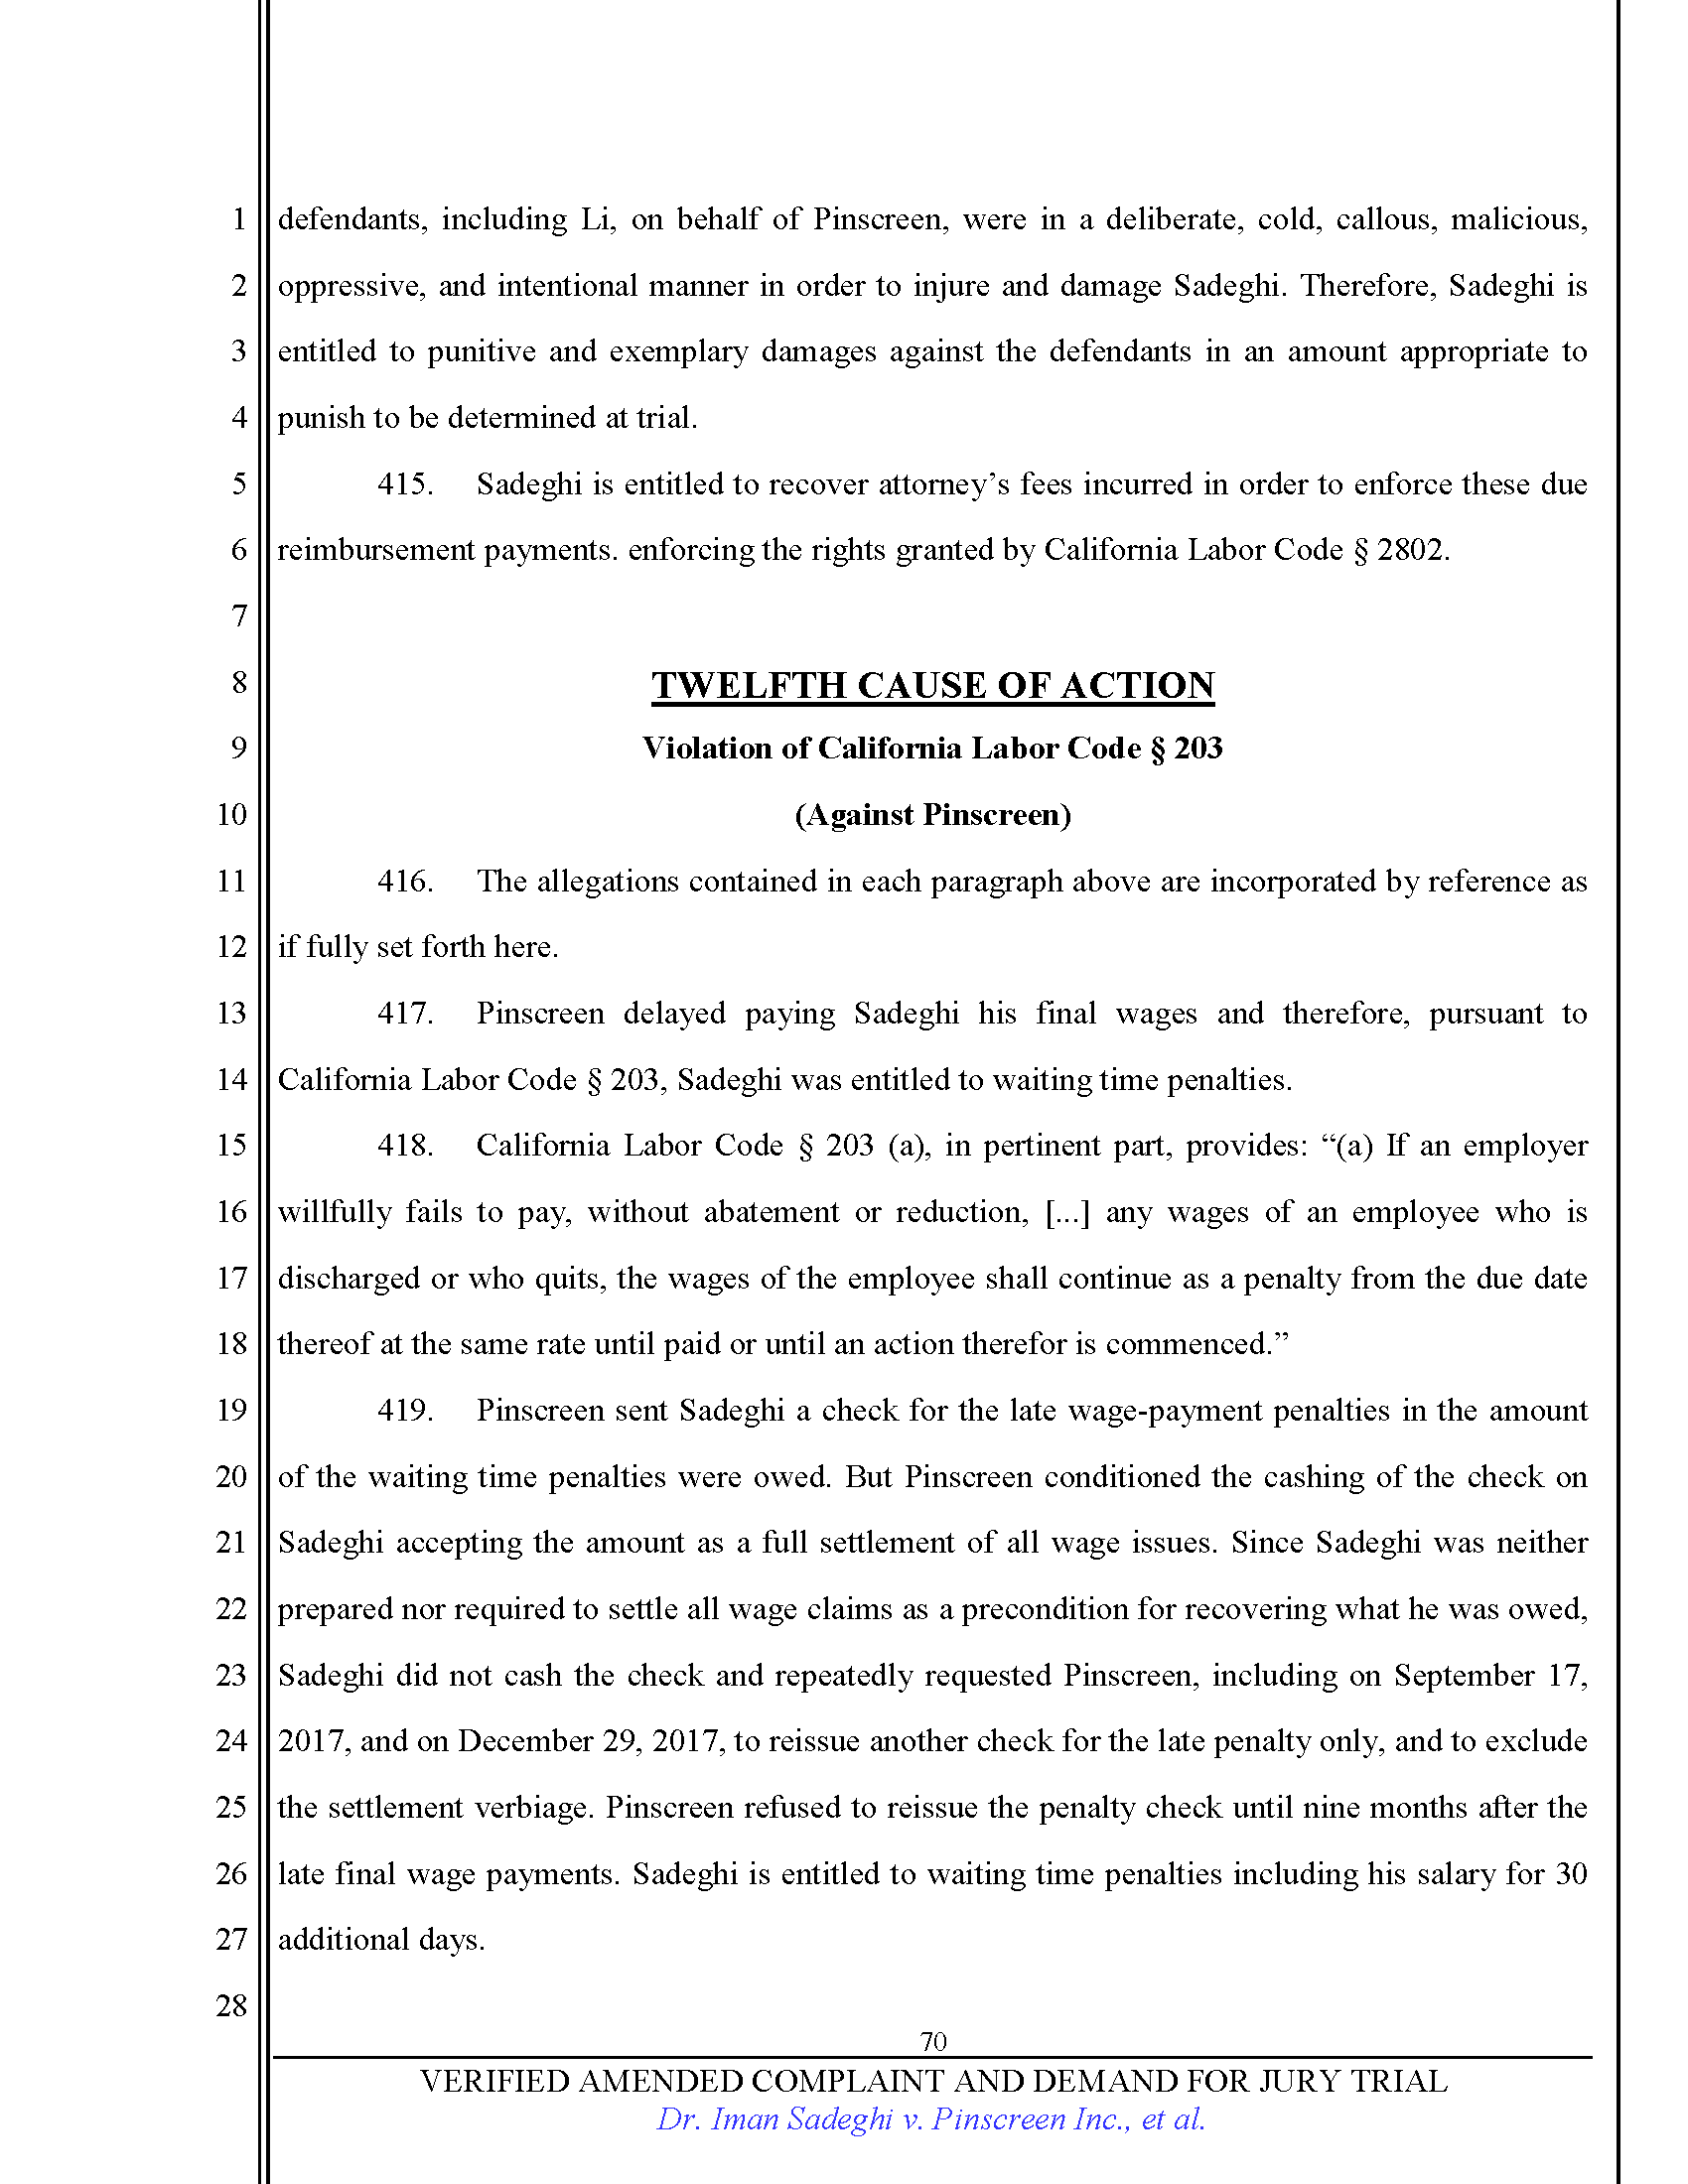 First Amended Complaint (FAC) Page 70